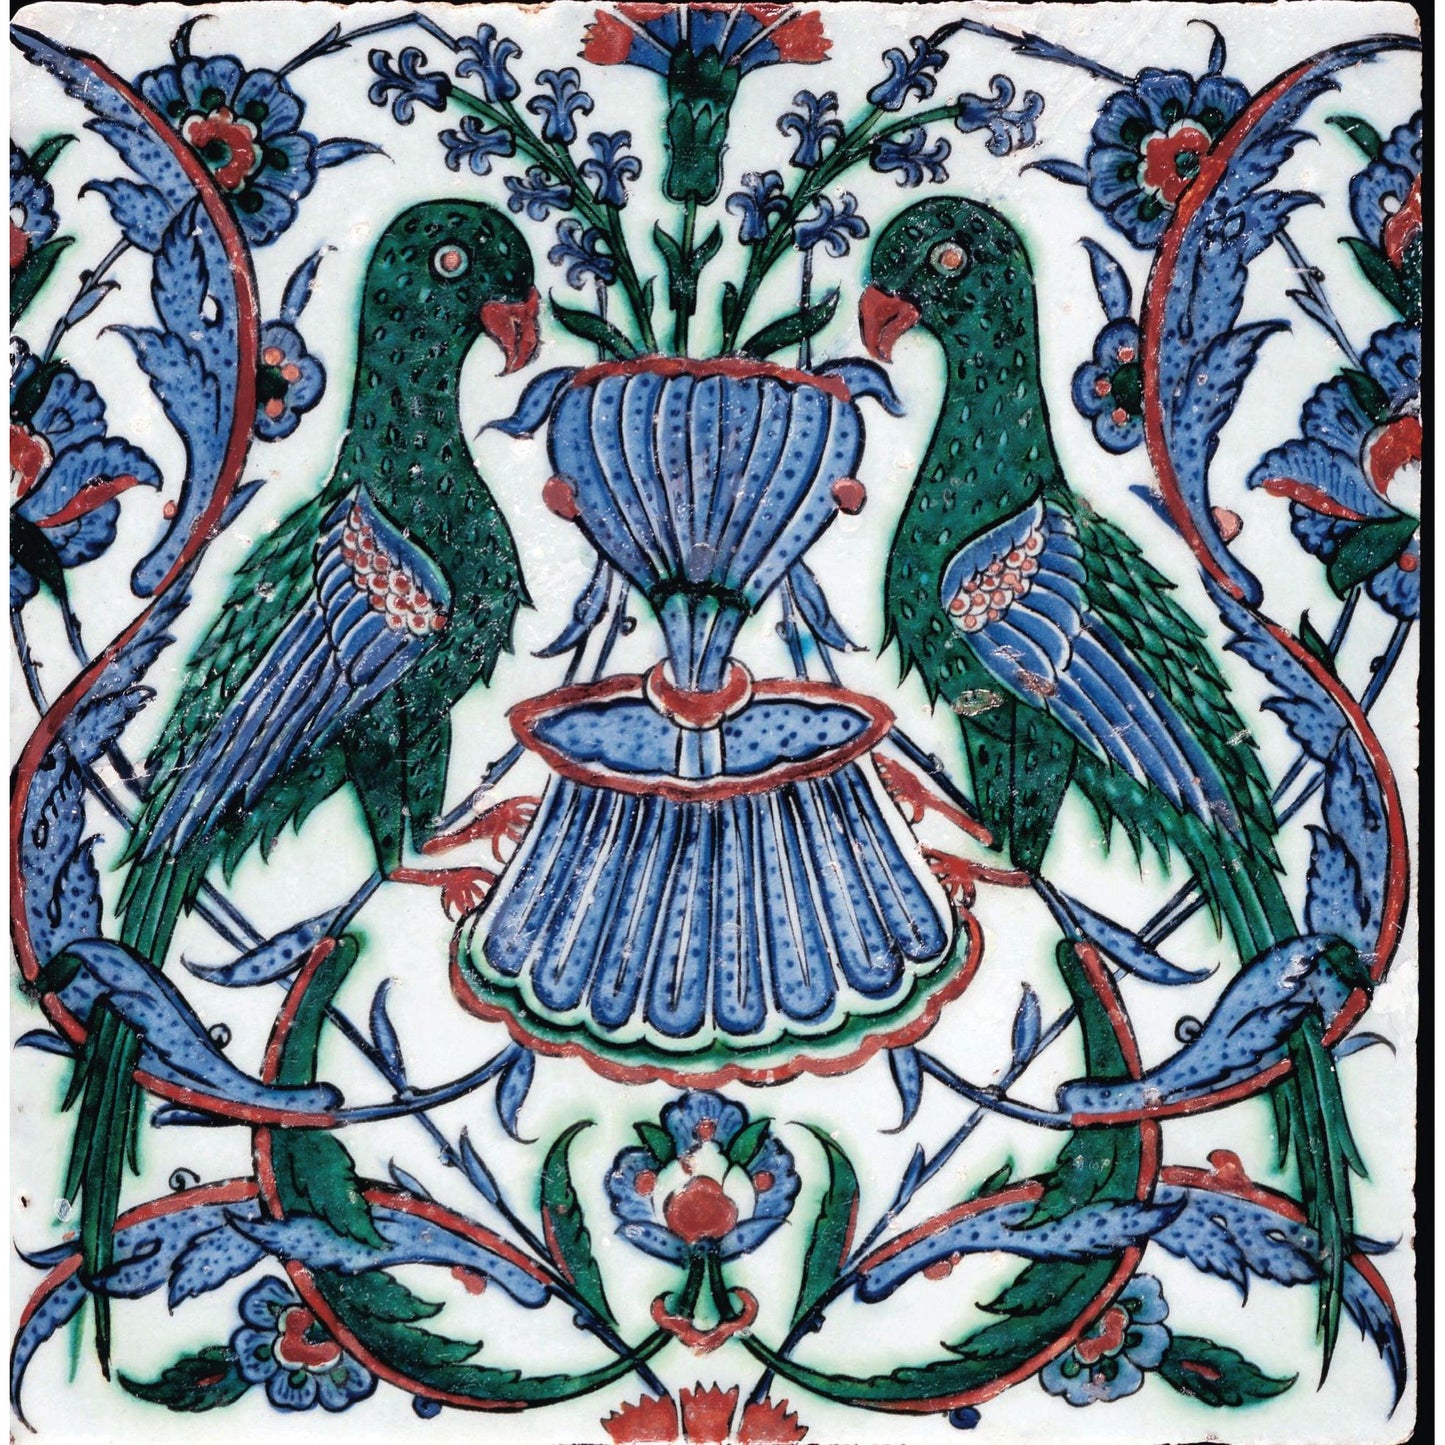 Square greeting card - tile with green parrots flanking a blue fountain. Floral motifs around in blue, green, and red highlights. From the collection of The Fitzwilliam Museum, brought to you by CuratingCambridge.com